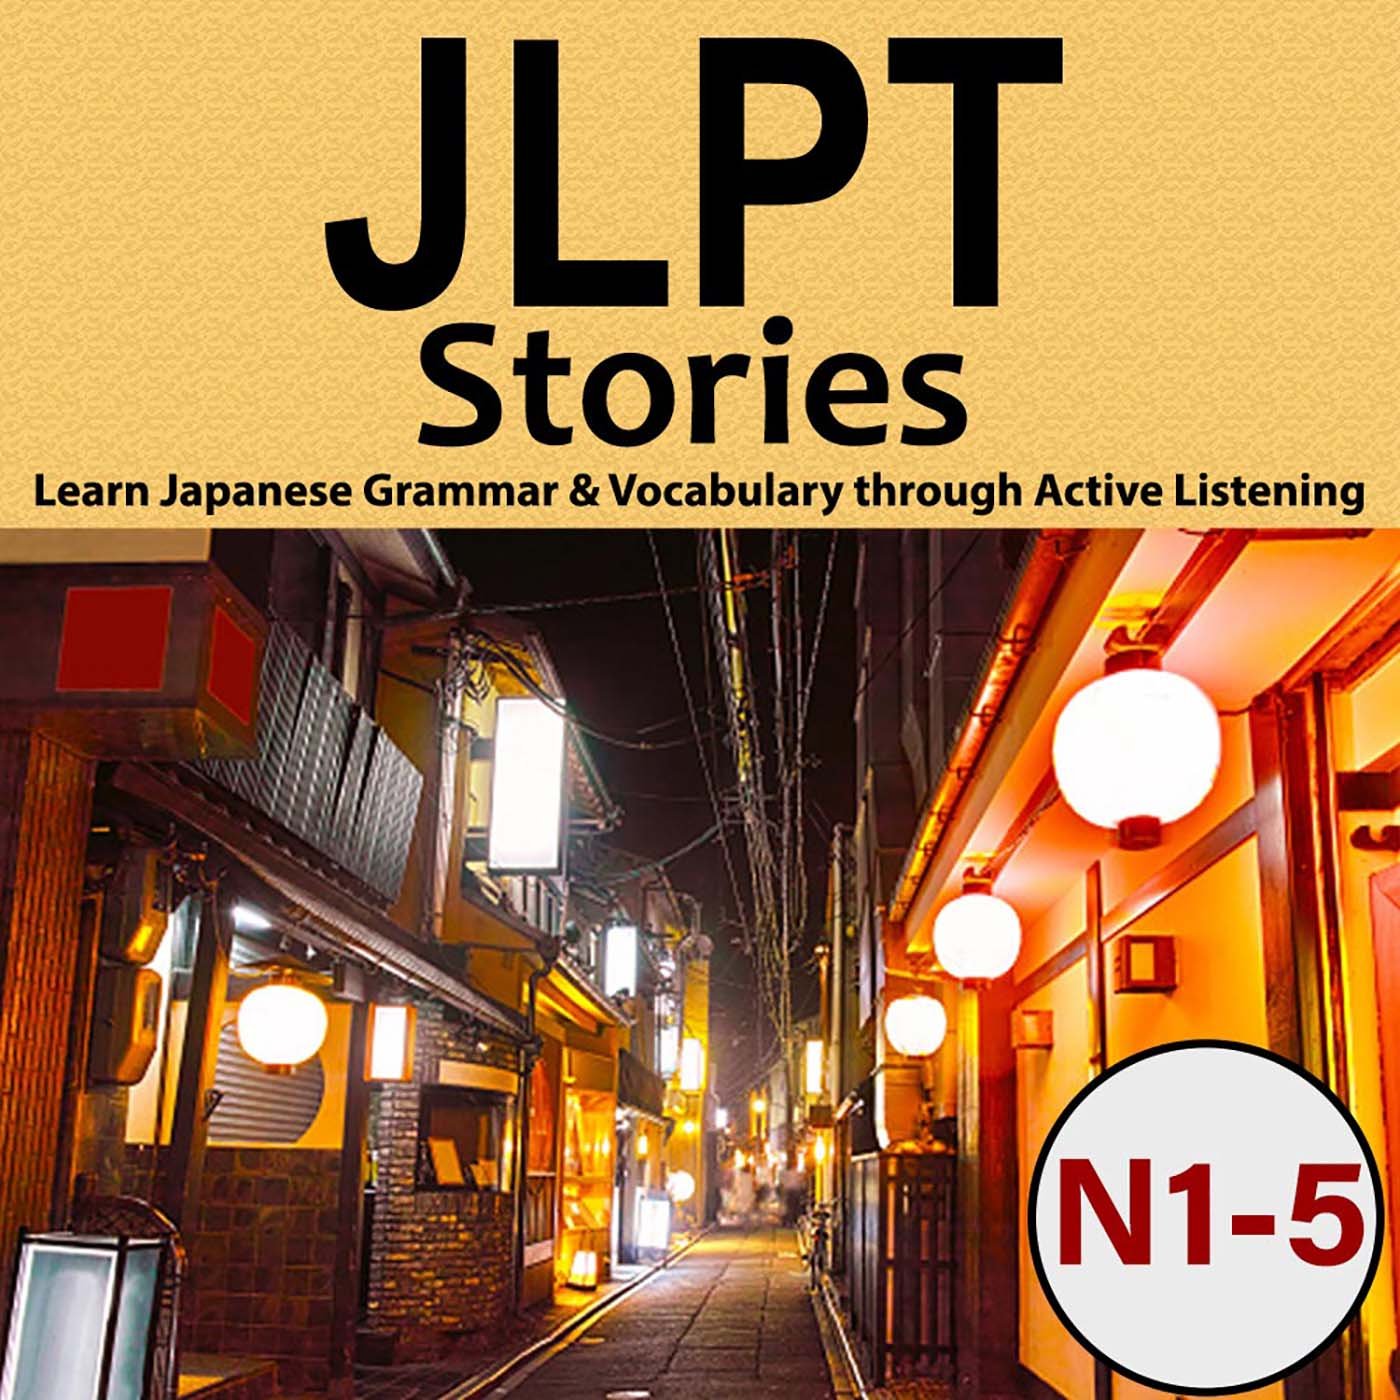 We tell stories to help you pass the JLPT. Sign up on iTunes or wherever. New Episodes each week!